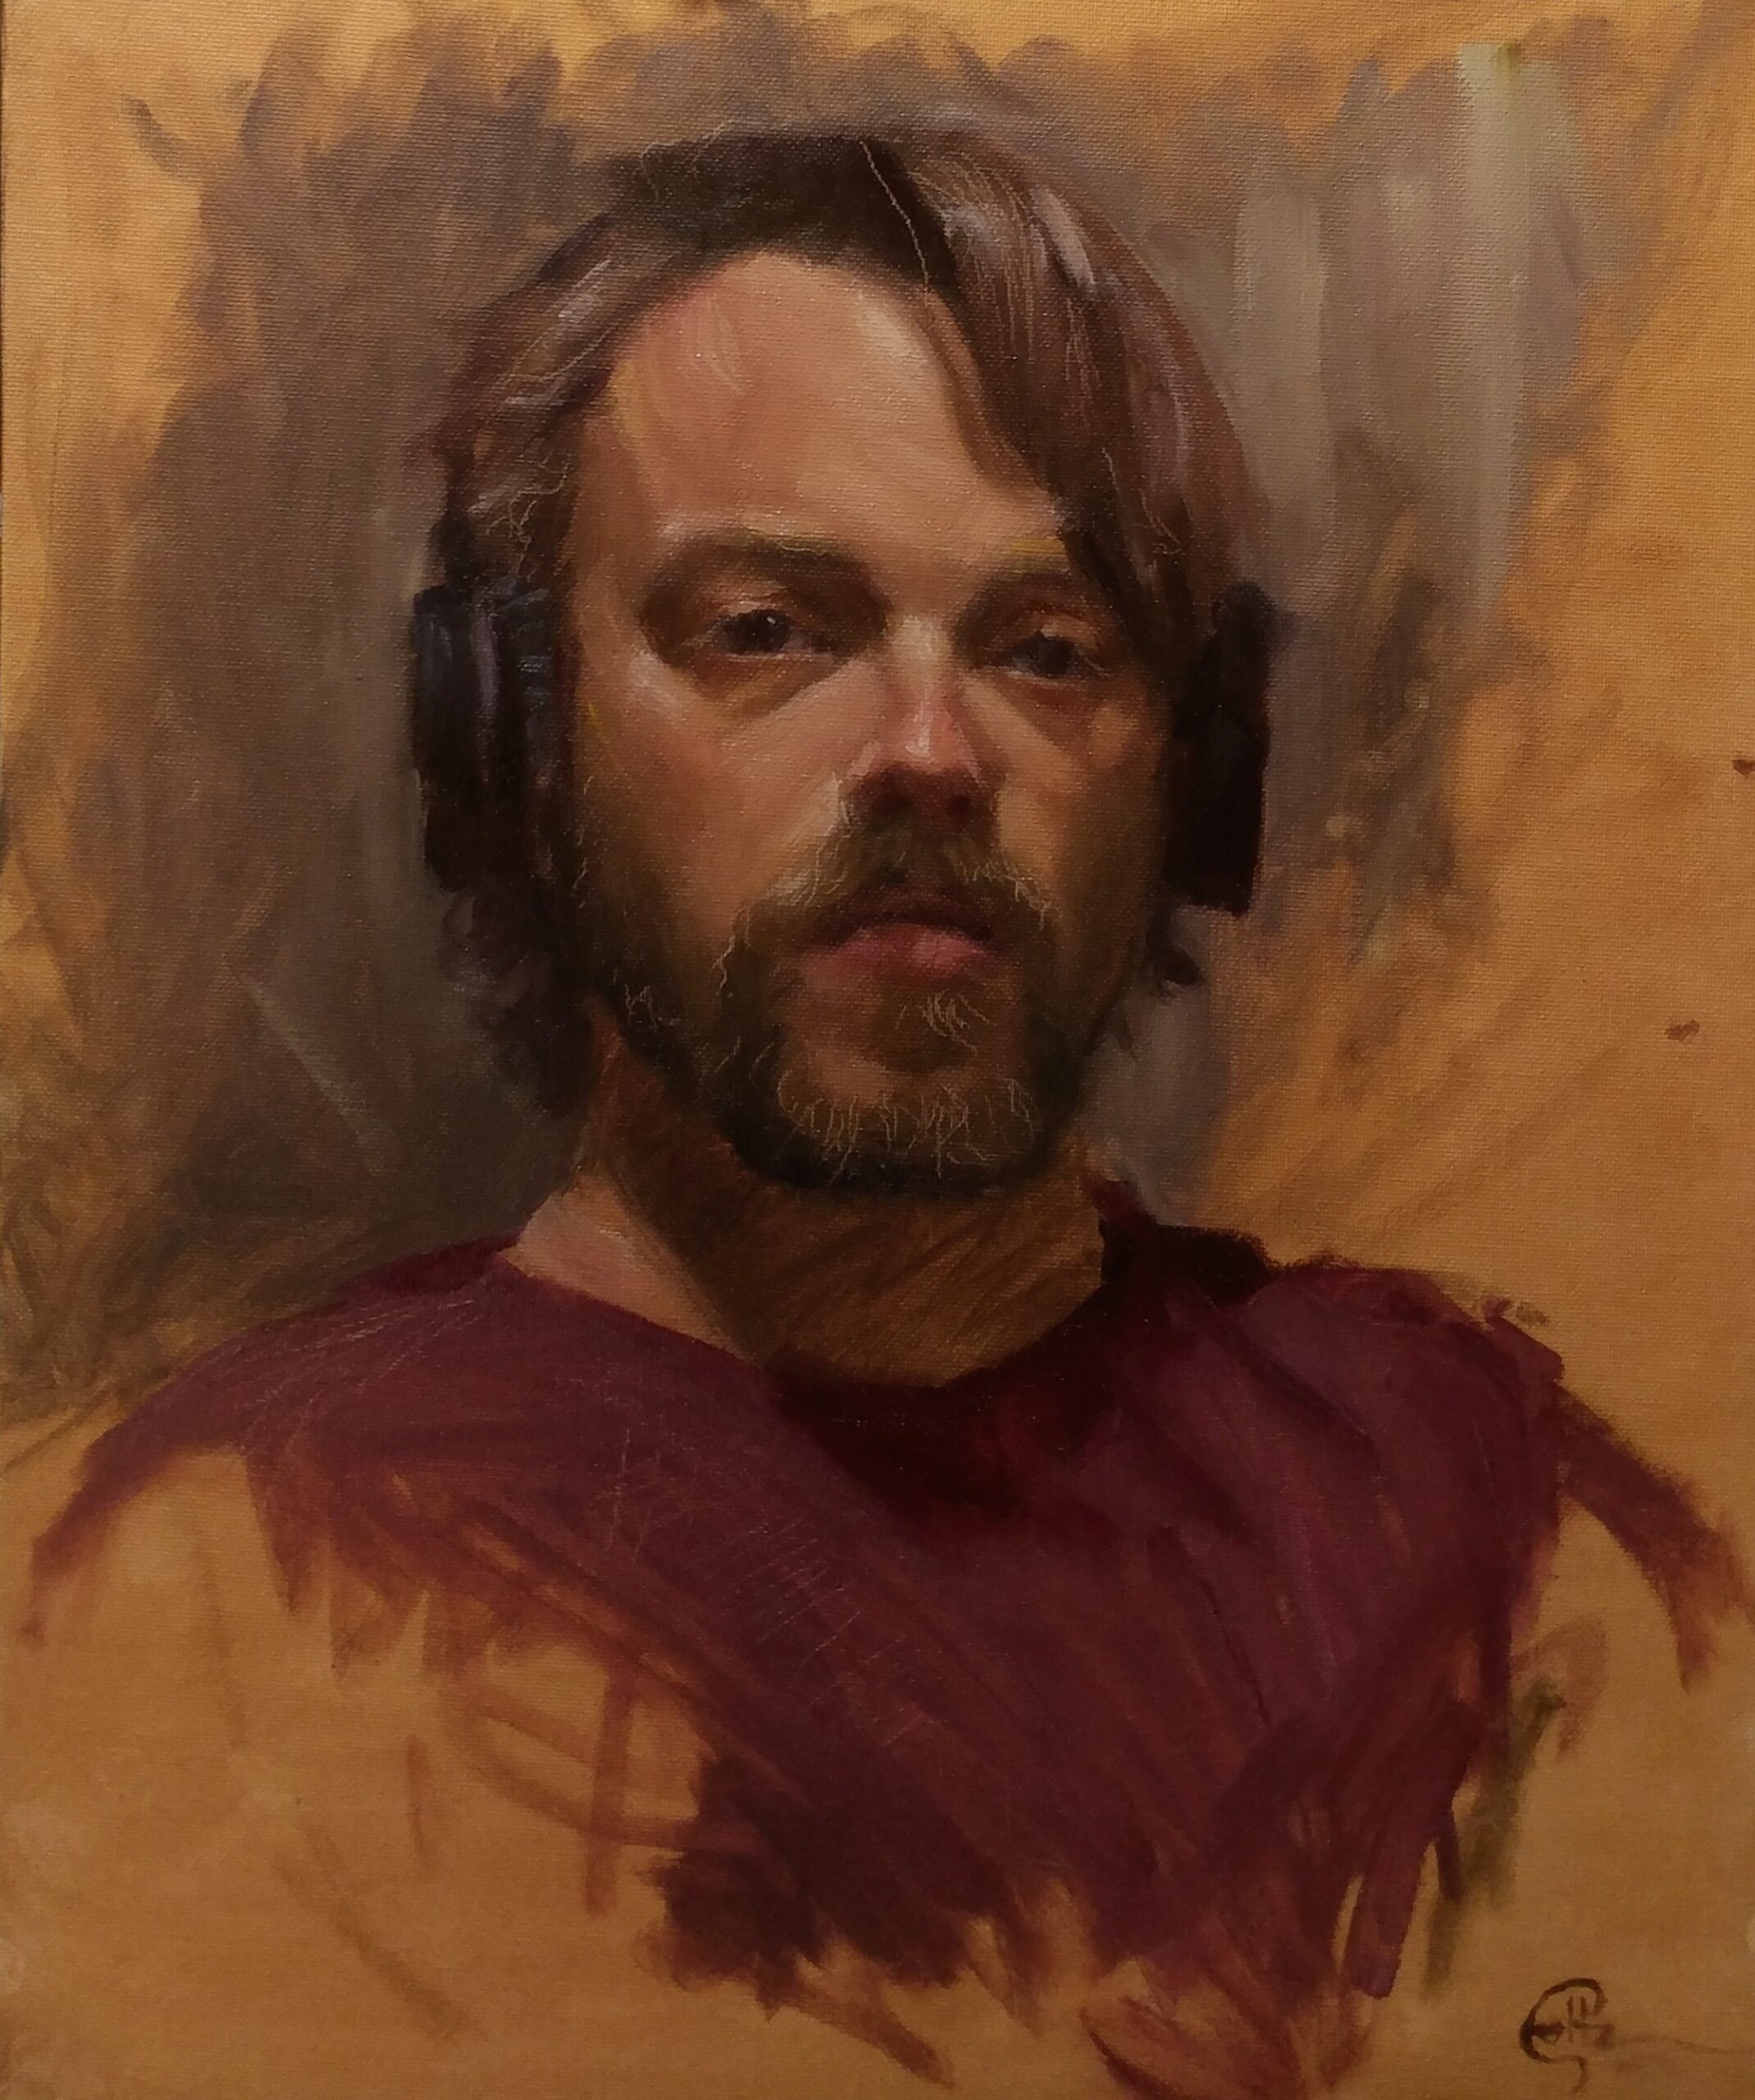 Portrait of Alex Foltz. He is a man with shaggy brown hair and a beard. He is wearing a red shirt.